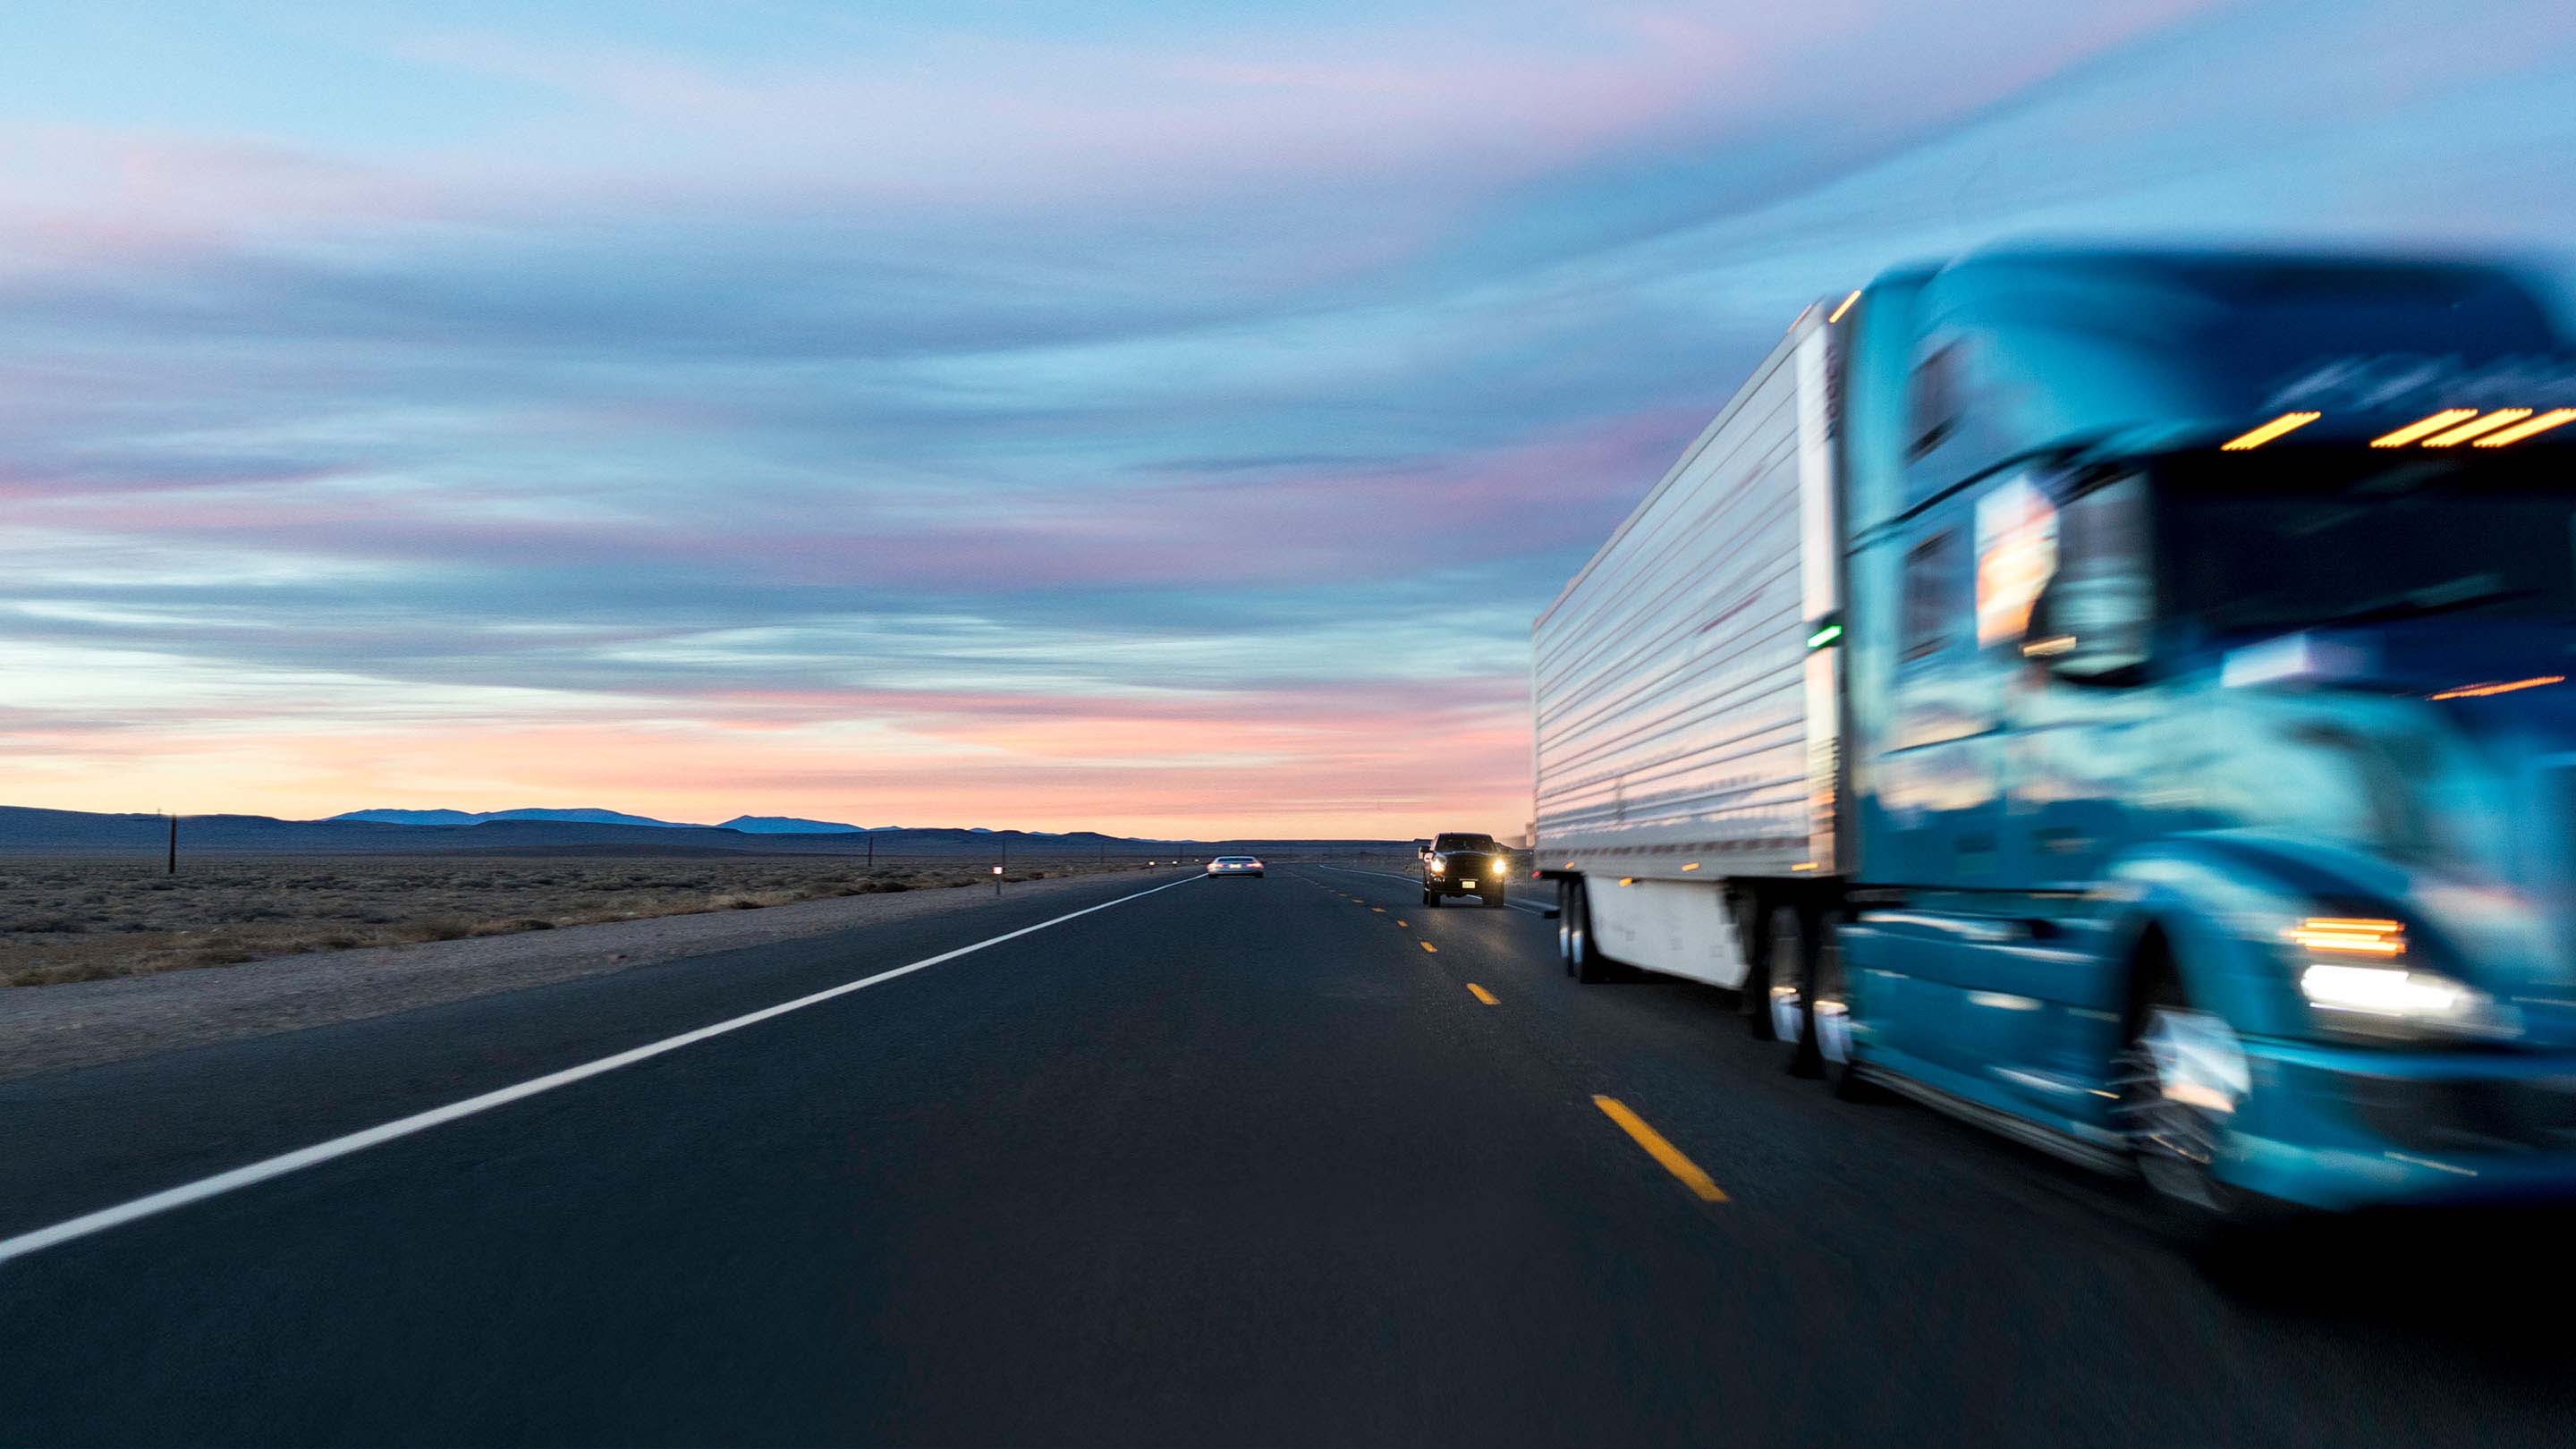 Blue truck driving on road with sunset in the background